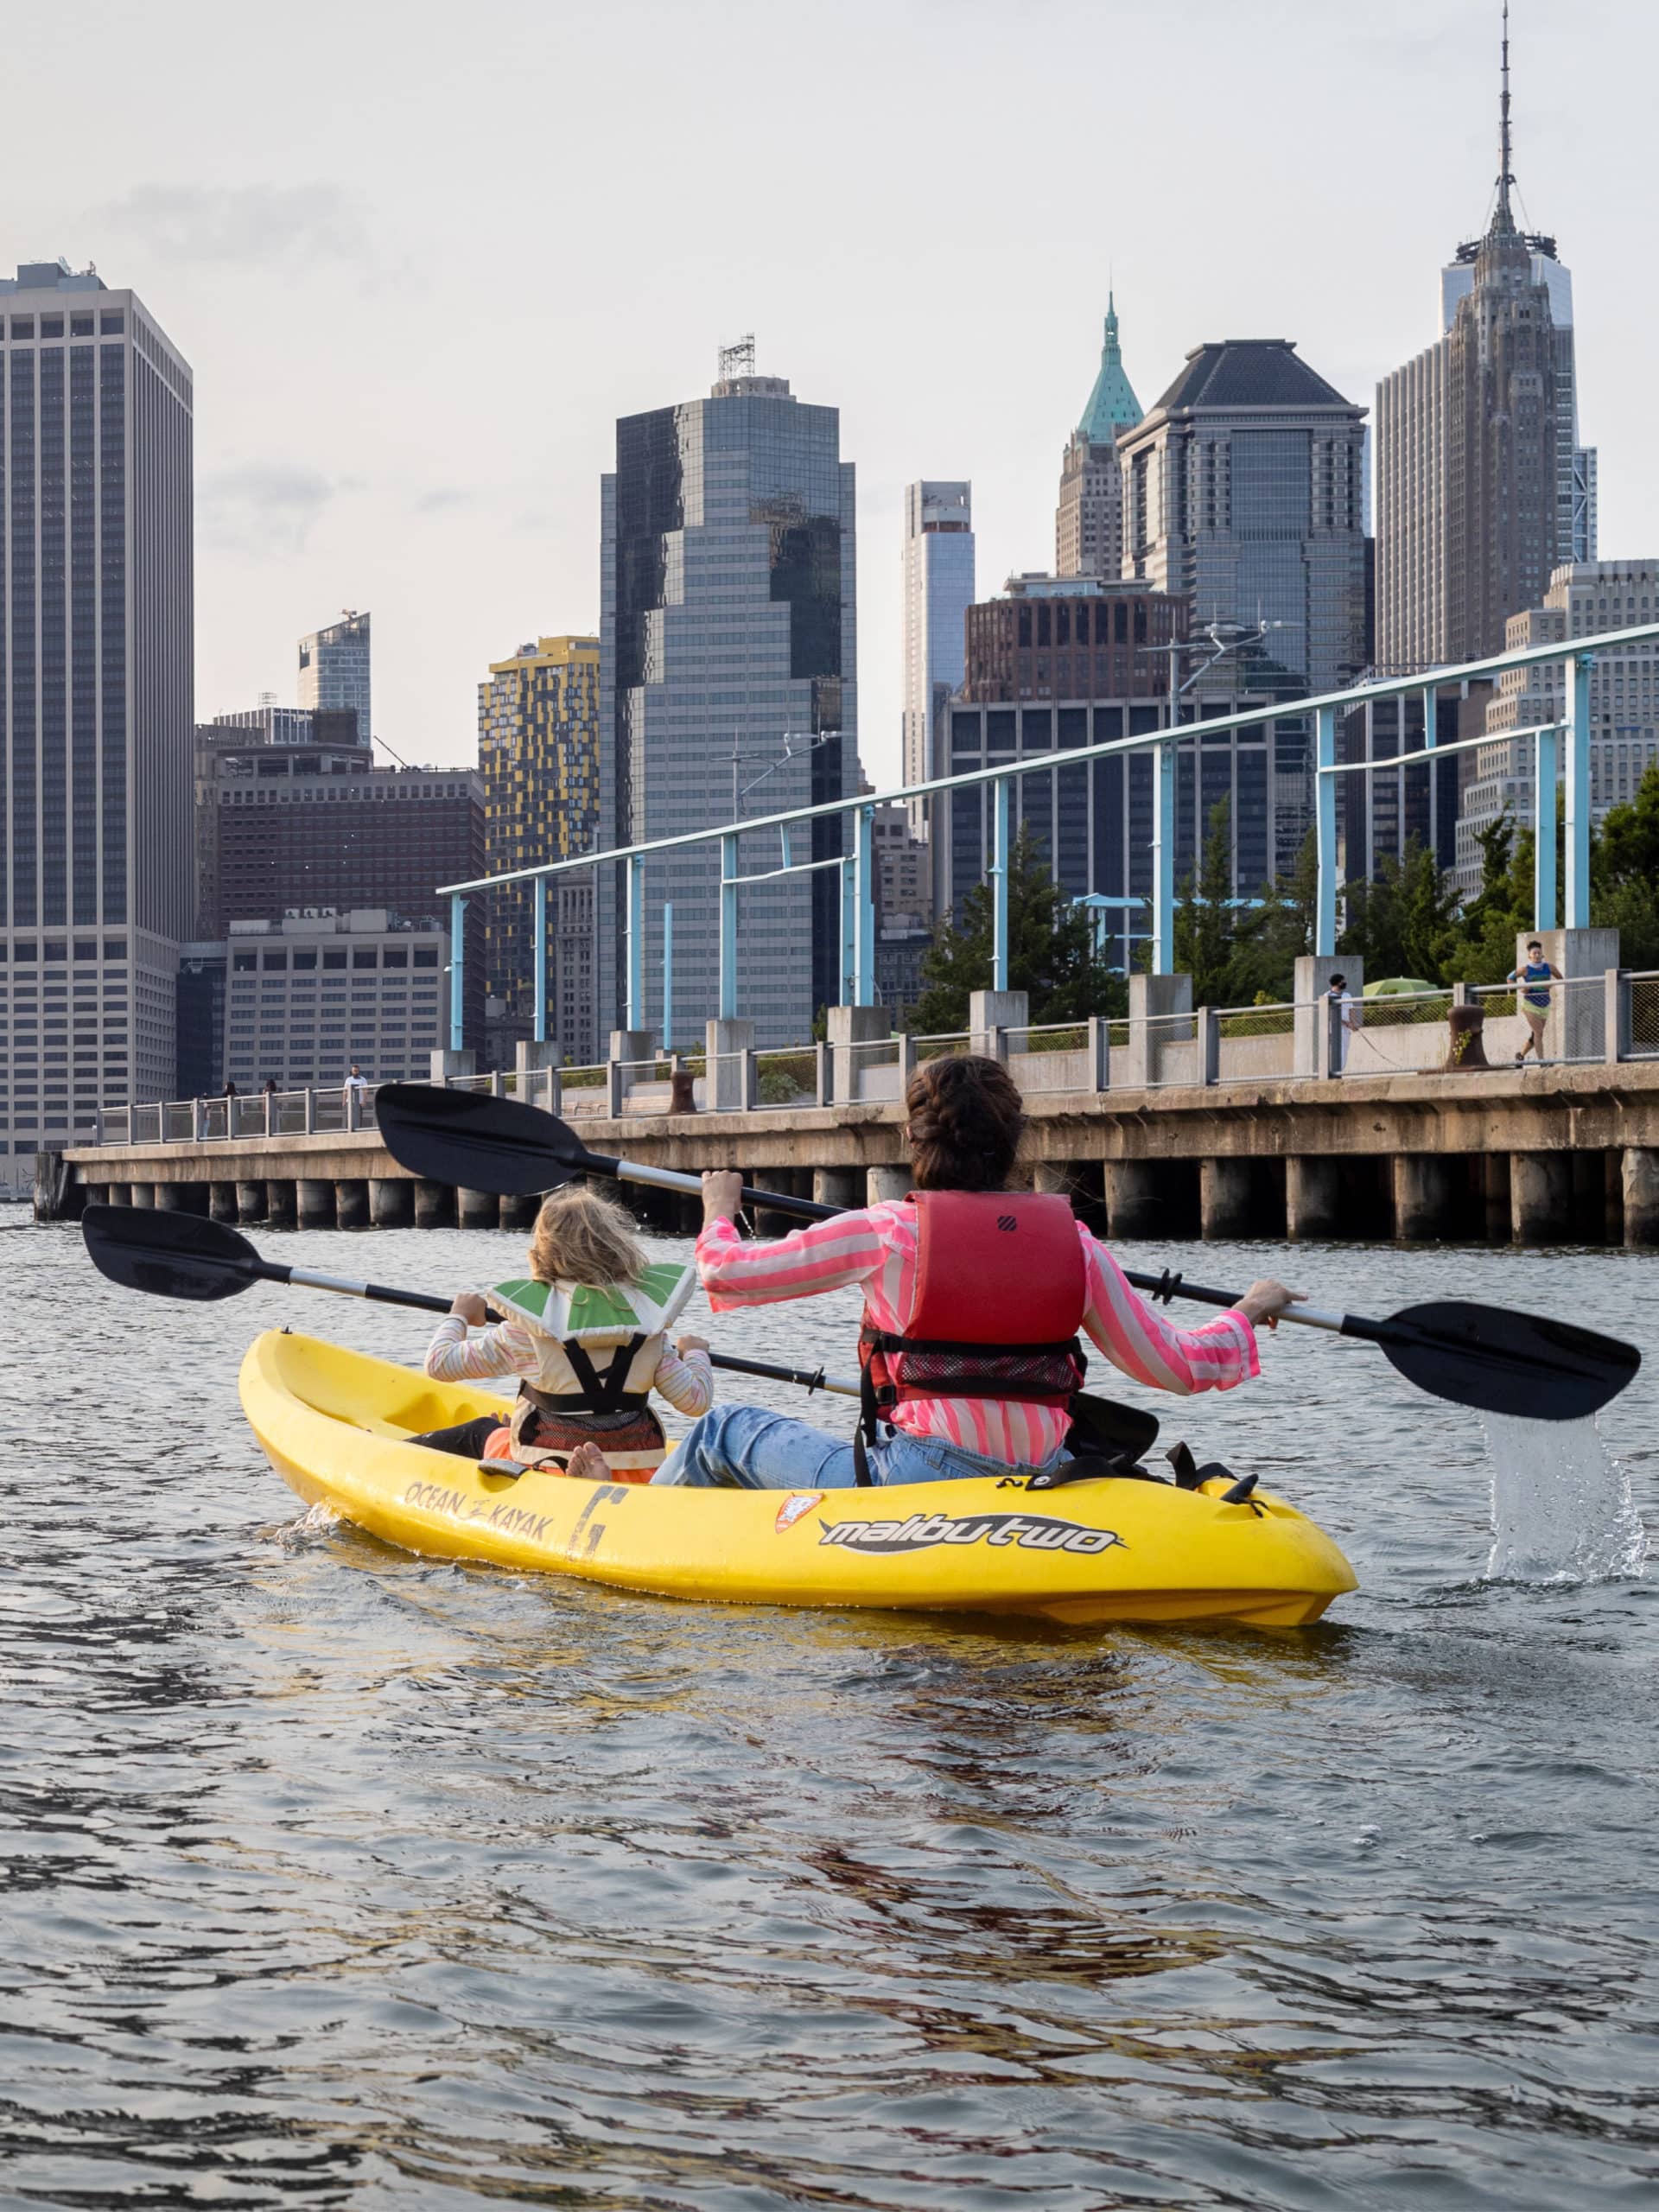 Woman and child paddling away in a yellow kayak with a pier seen in the background.